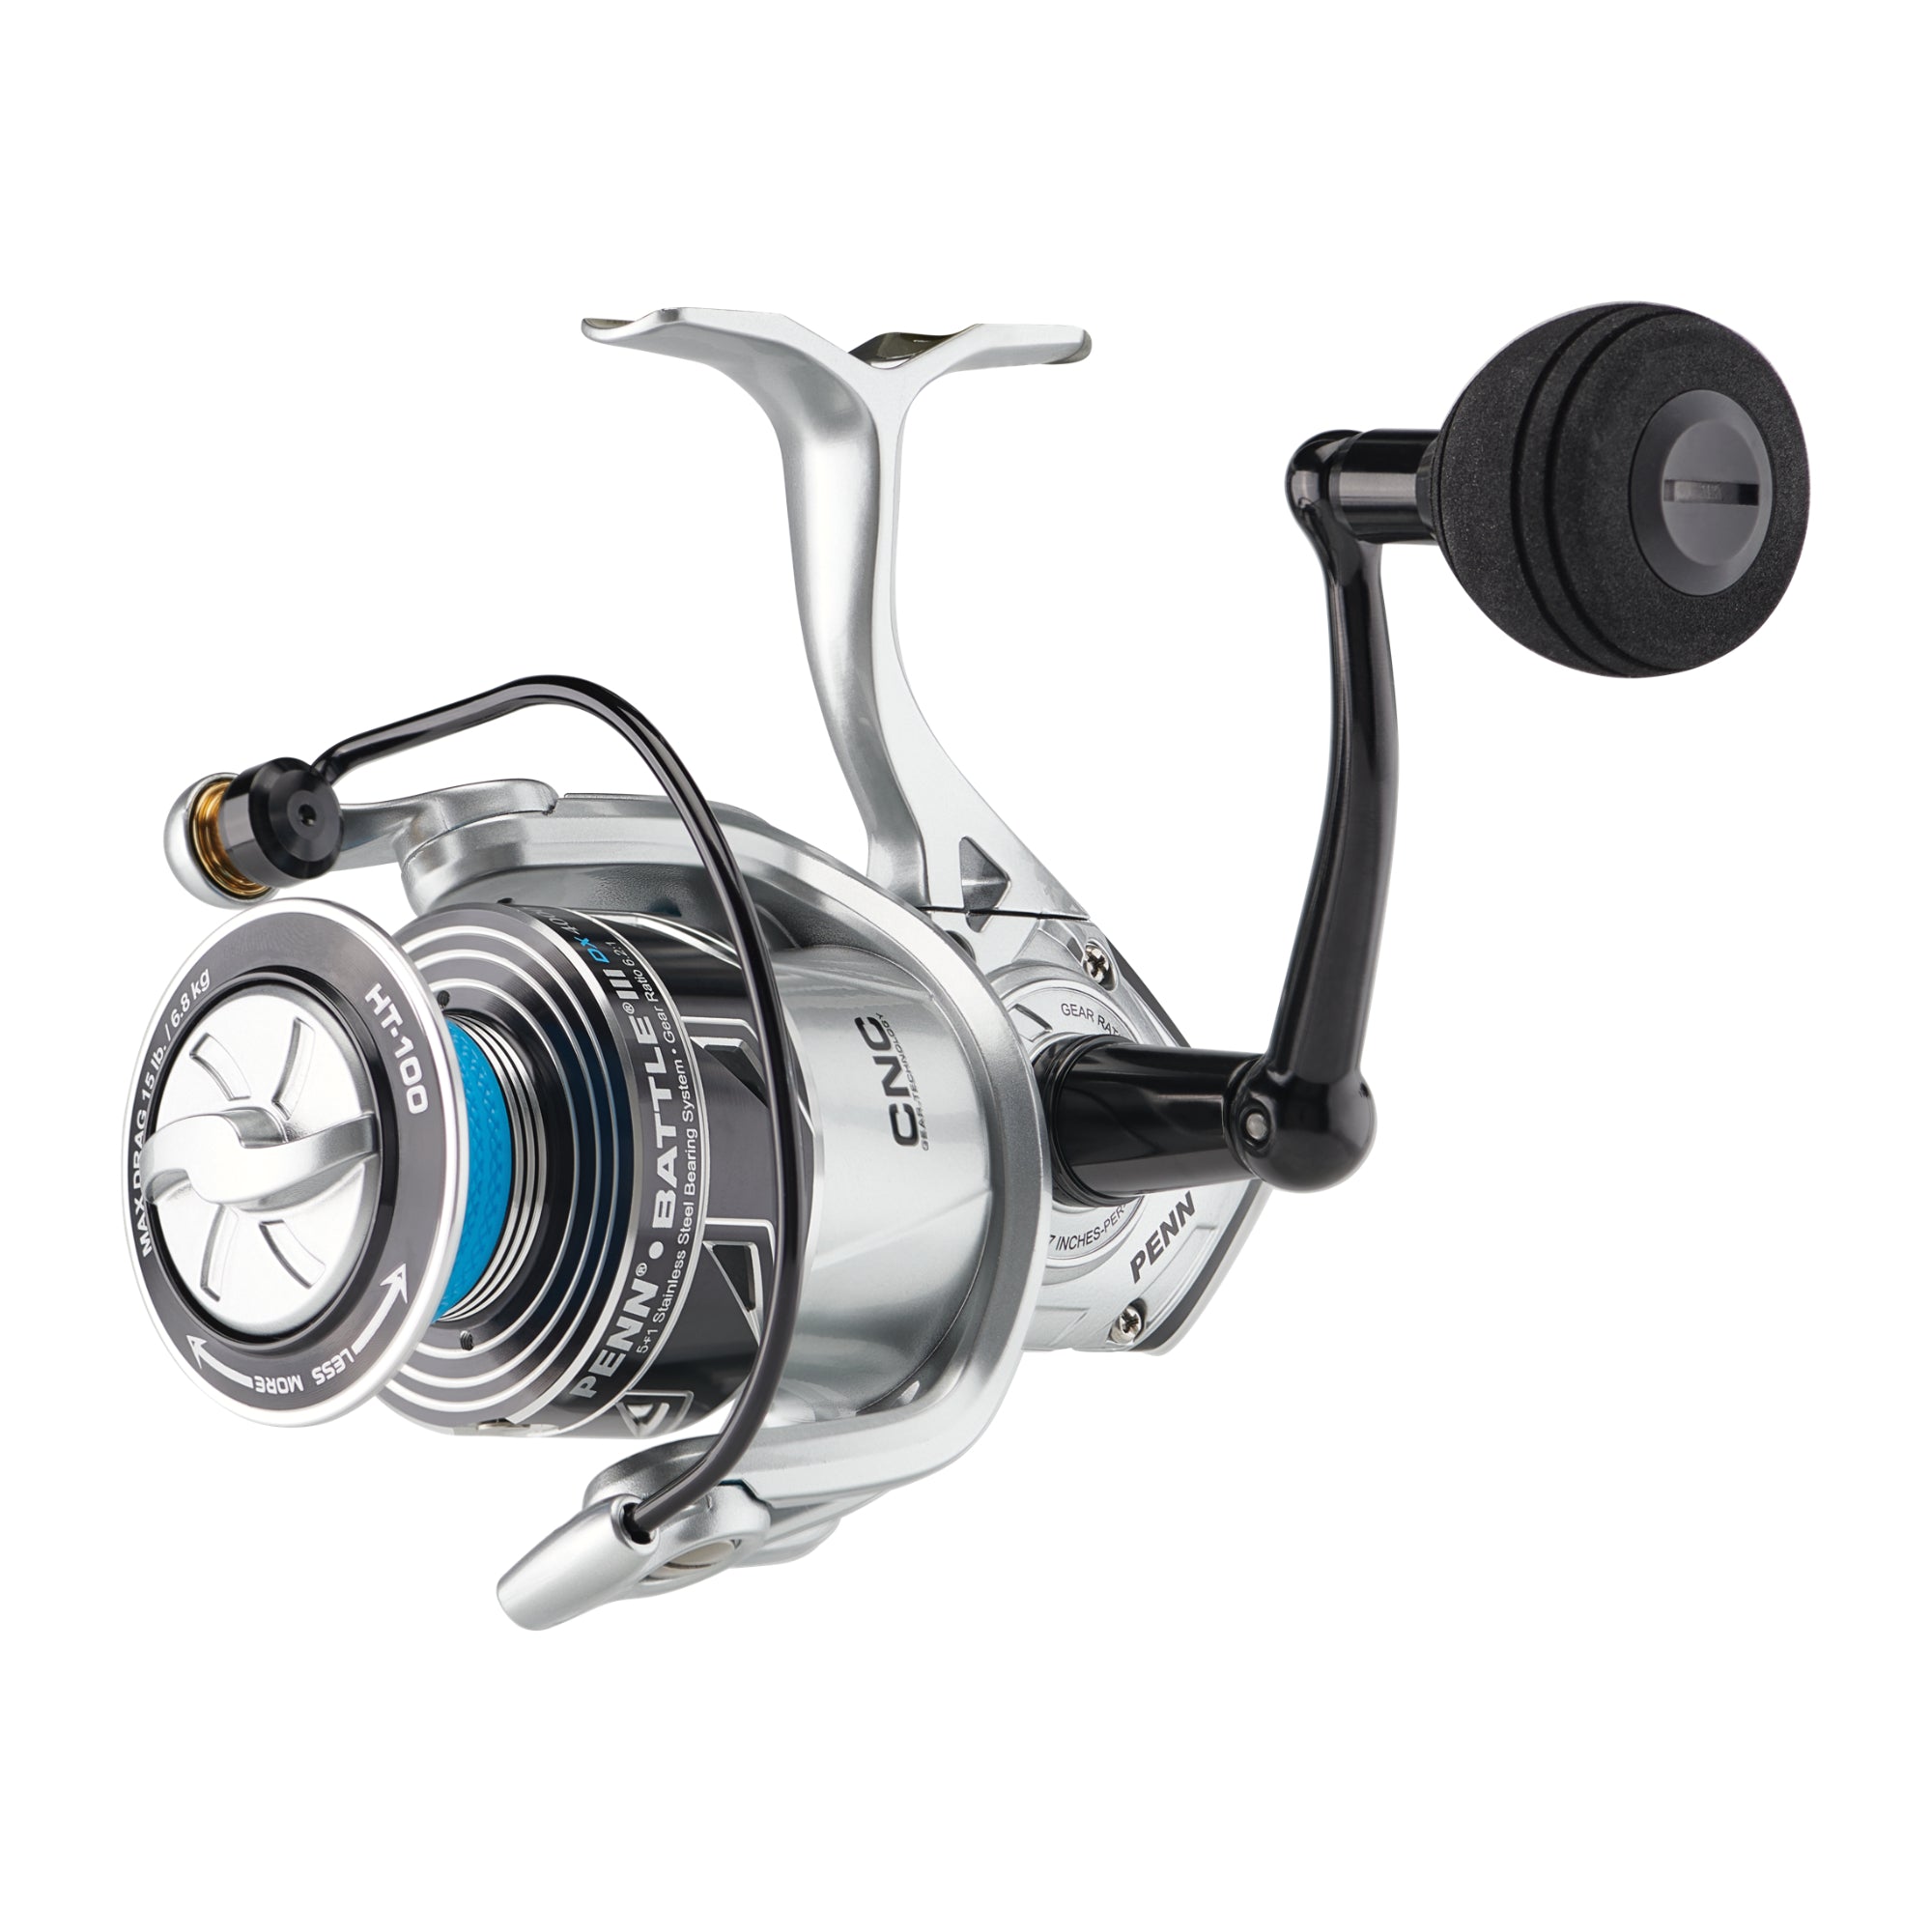 PENN SPINFISHER 4300SS SPINNING REEL - Berinson Tackle Company